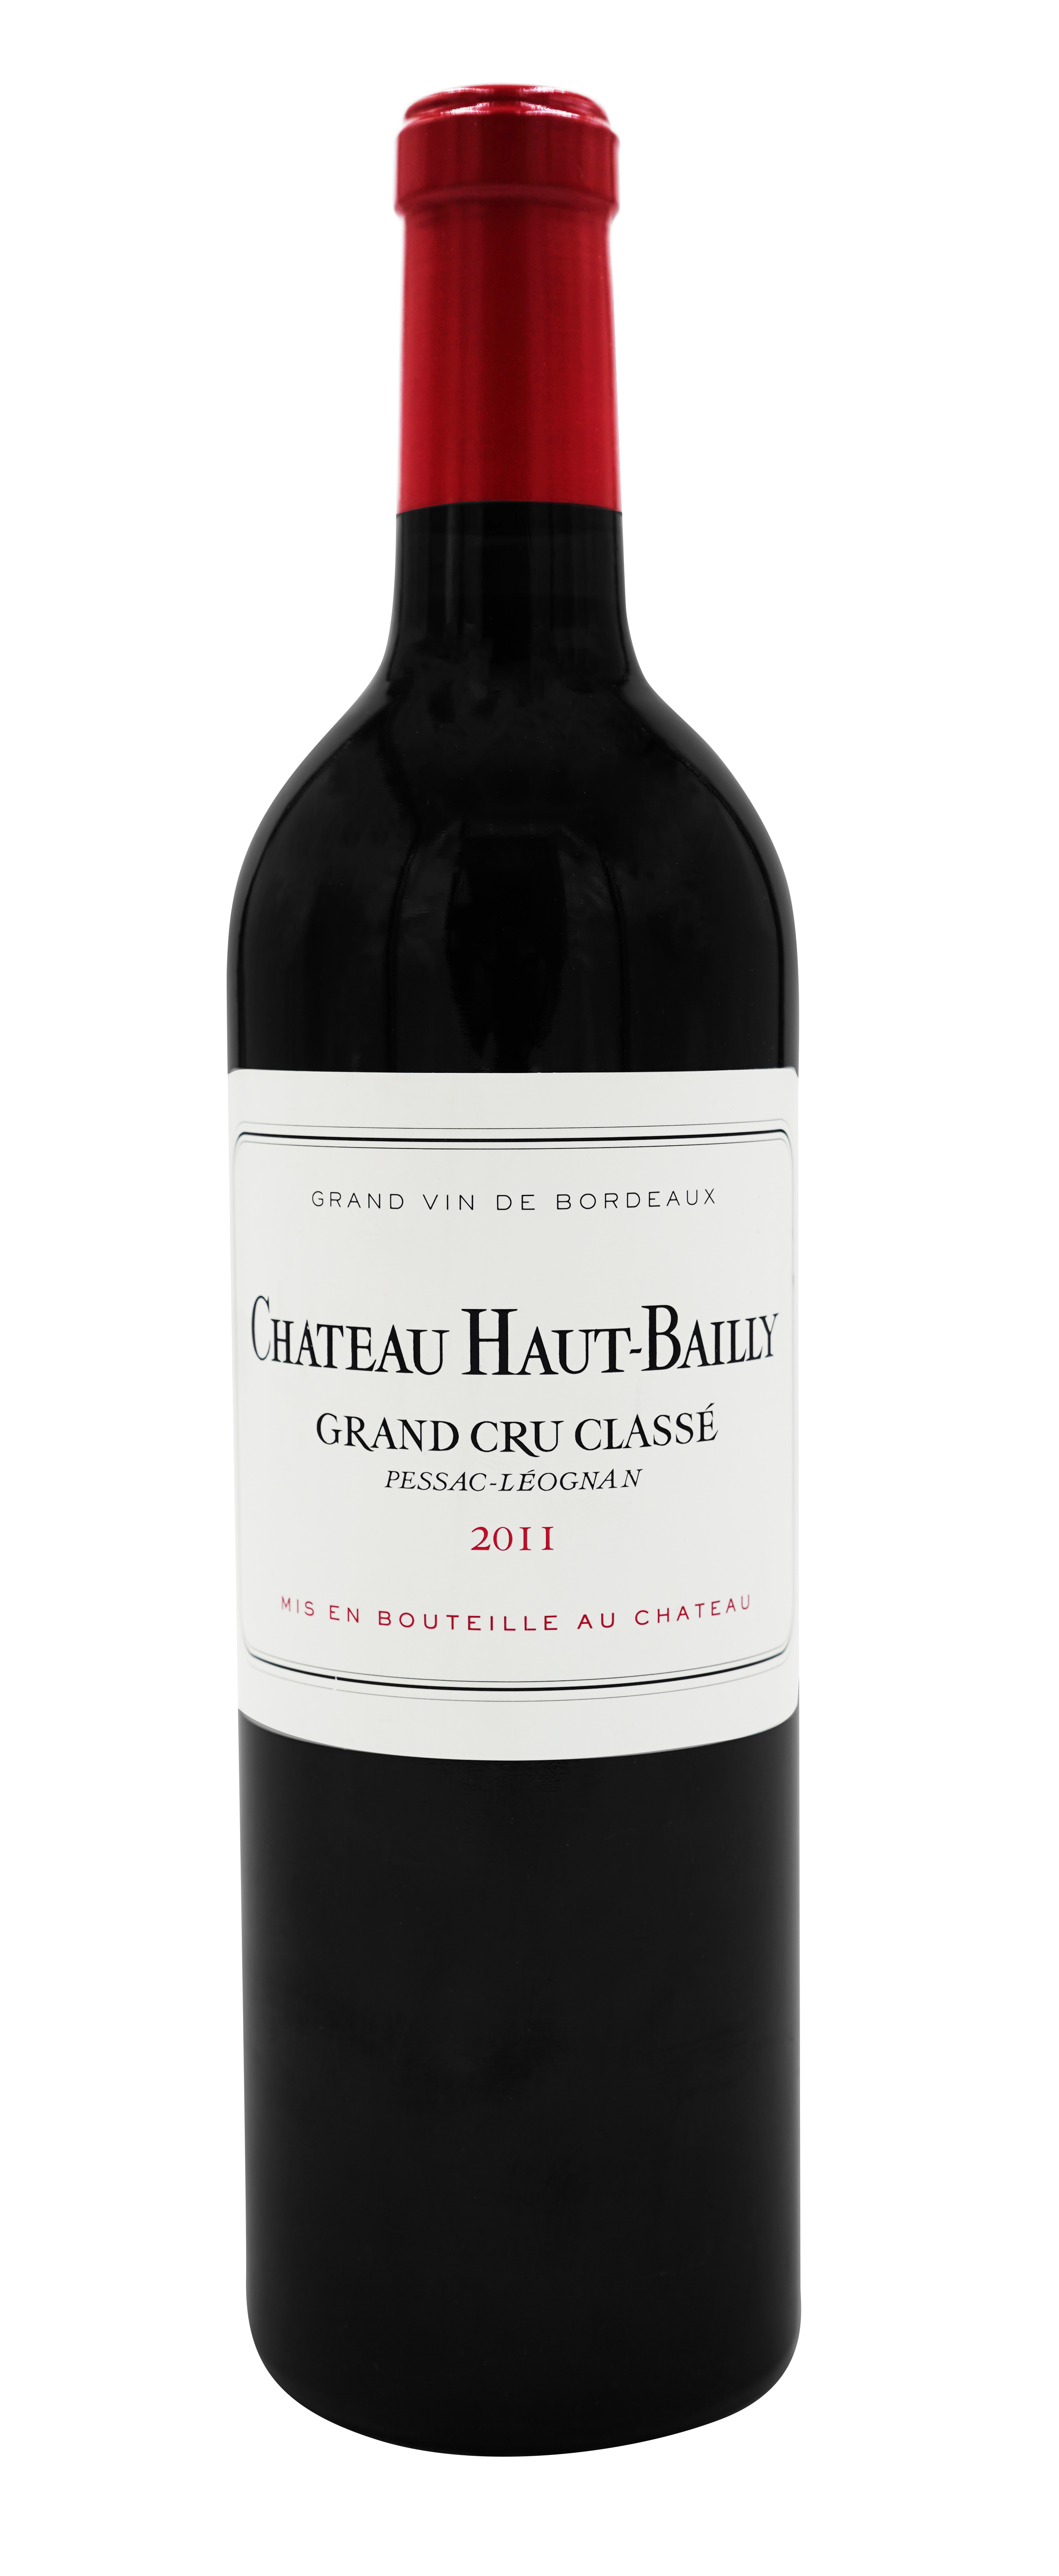 Chateau Haut-Bailly 2011